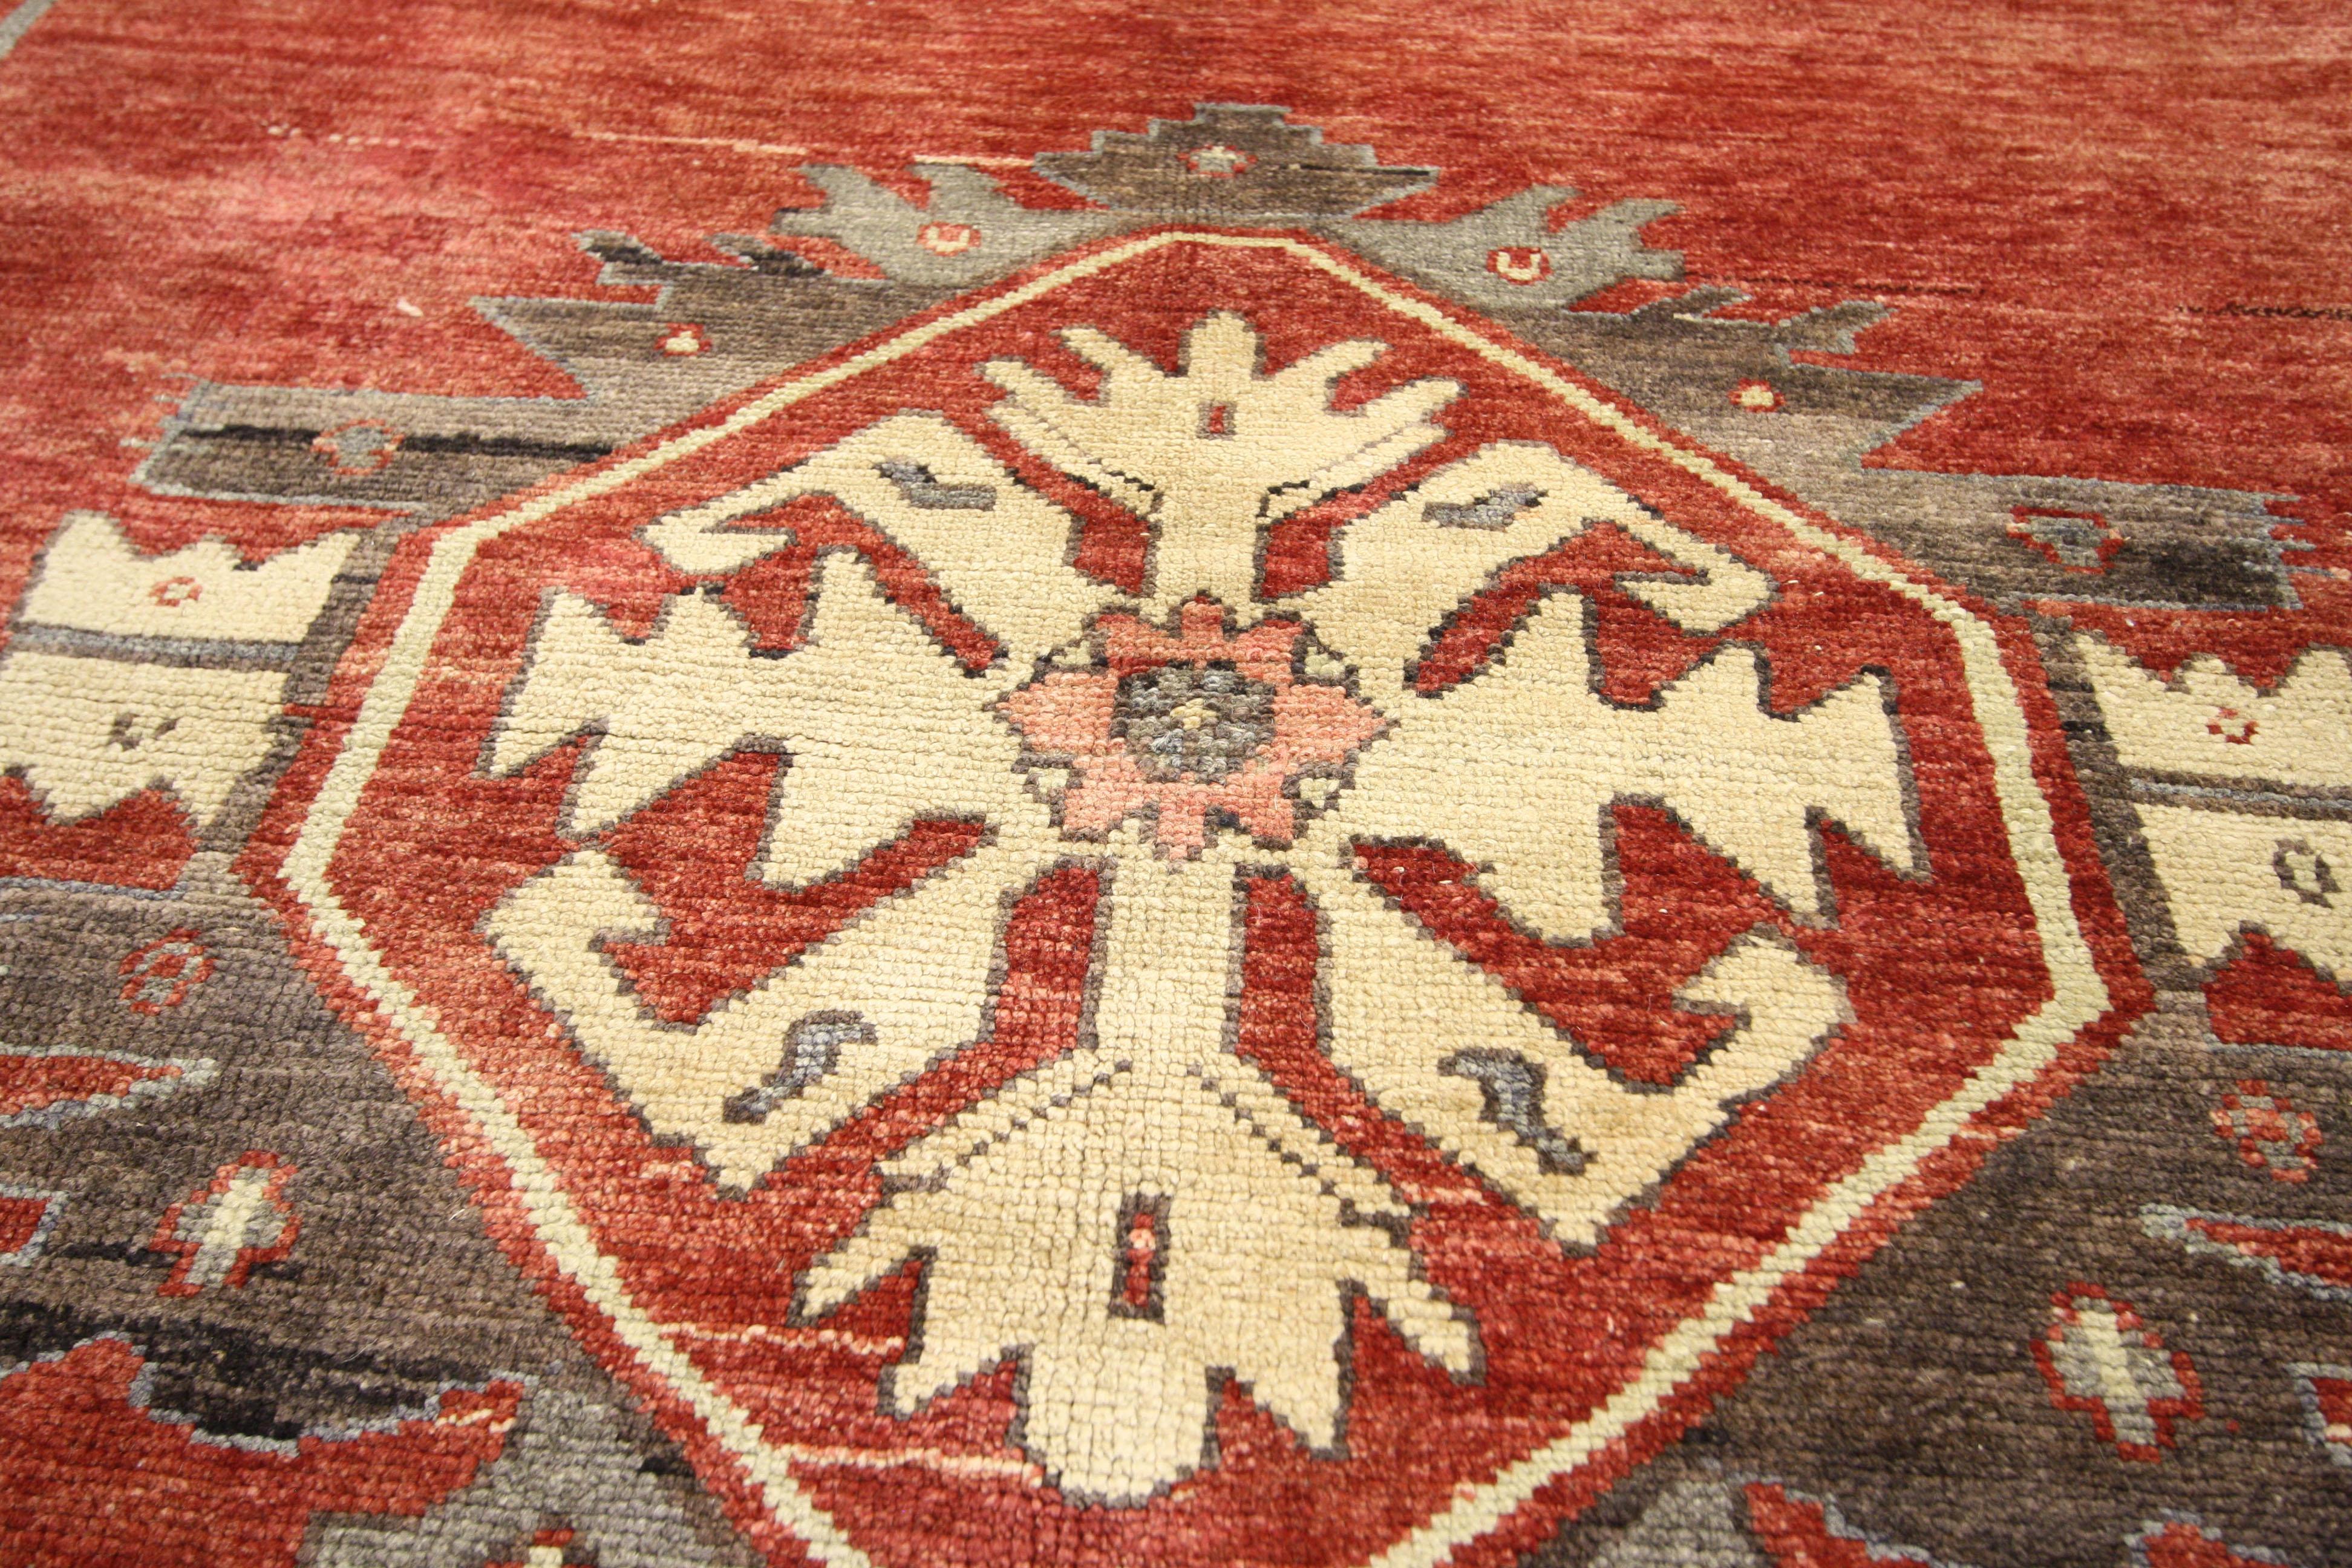 51383 Jacobean Style Vintage Turkish Oushak Gallery Rug, Wide Hallway Runner, 05'03 x 12'00. This hand-knotted wool vintage Turkish Oushak gallery rug features three tribal medallions in an open abrashed field. Rendered in a refined palette of warm